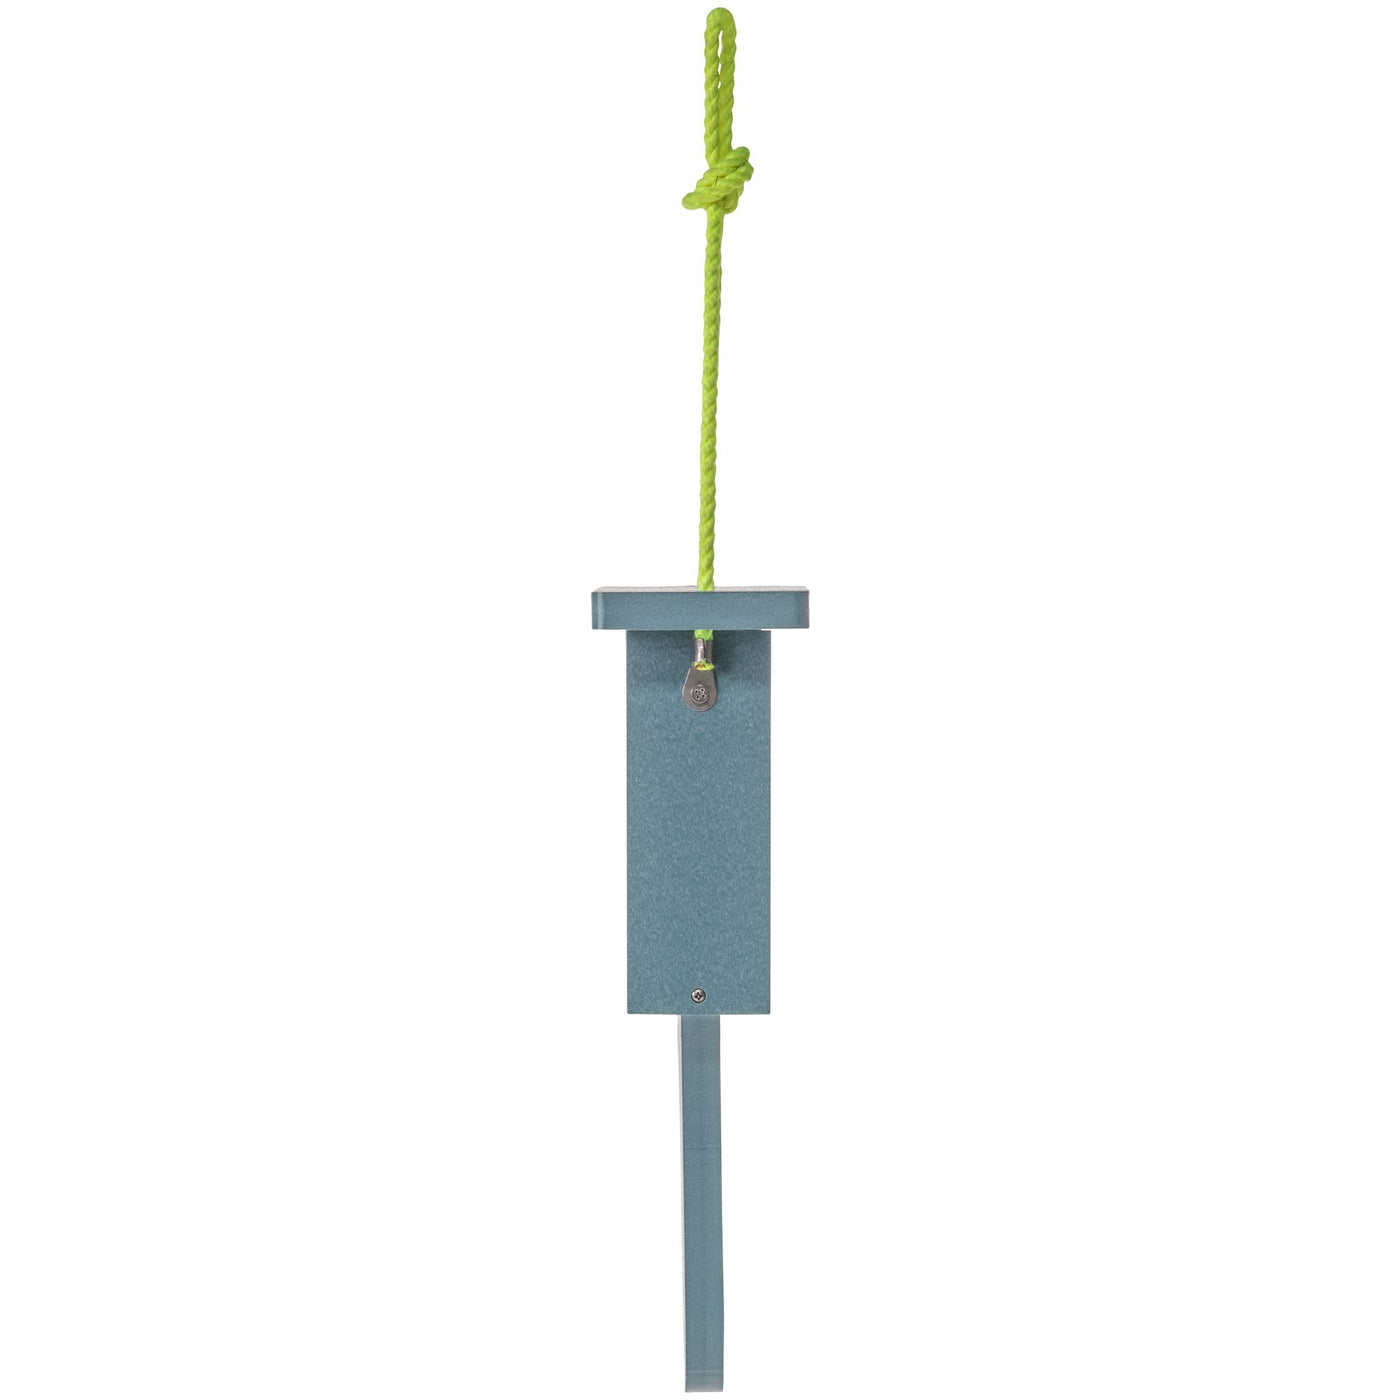 Suet Feeder with Tail Prop Color Pop Collection in Lake Blue Recycled Plastic - Birds Choice